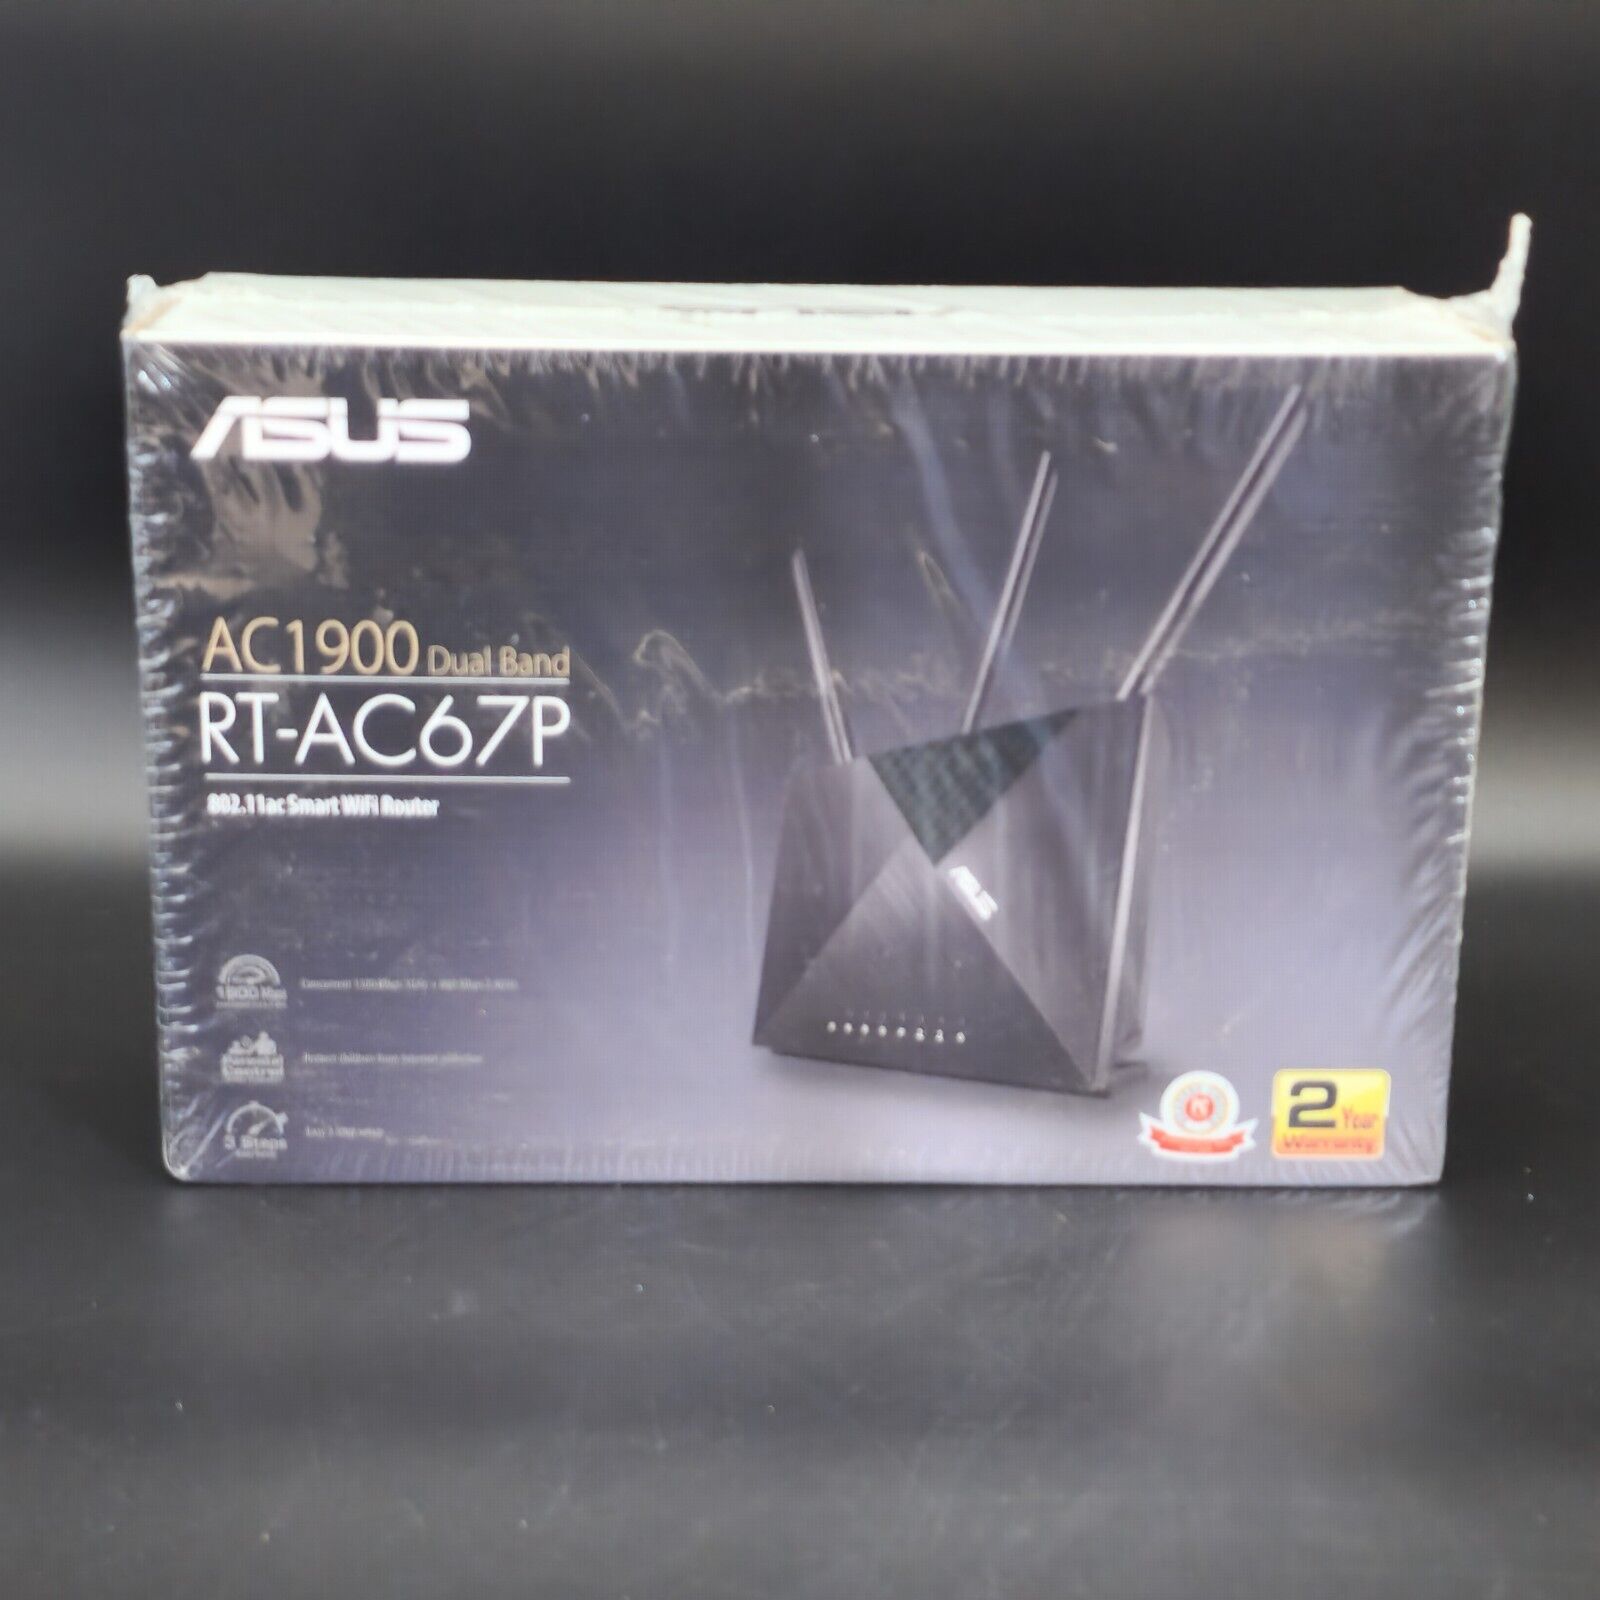 ASUS AC1900 Dual Band Wireless Internet Router - Black